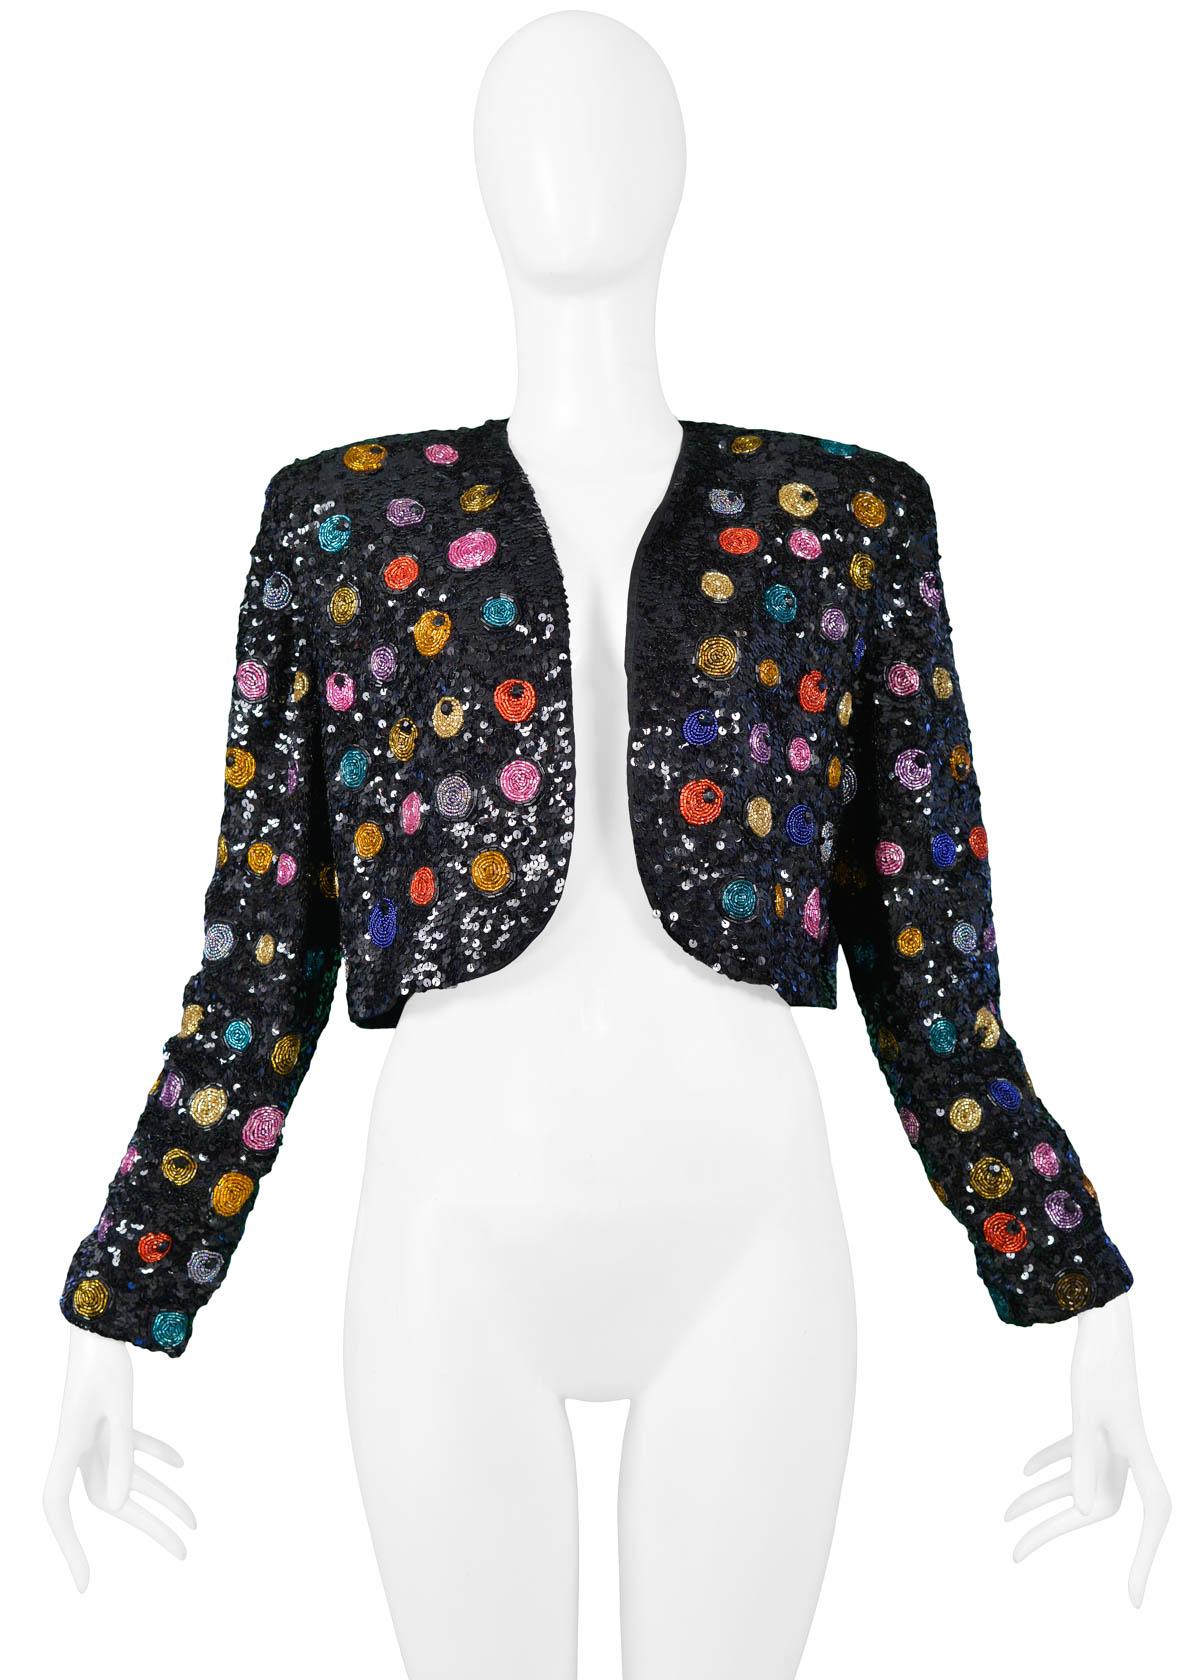 Vintage black Yves Saint Laurent sequin bolero jacket featuring multicolor circular beaded applique, long sleeves, and structured shoulders.

Excellent Vintage Condition.

No Size Label. 
Will fit a size Small. Please inquire for measurements.